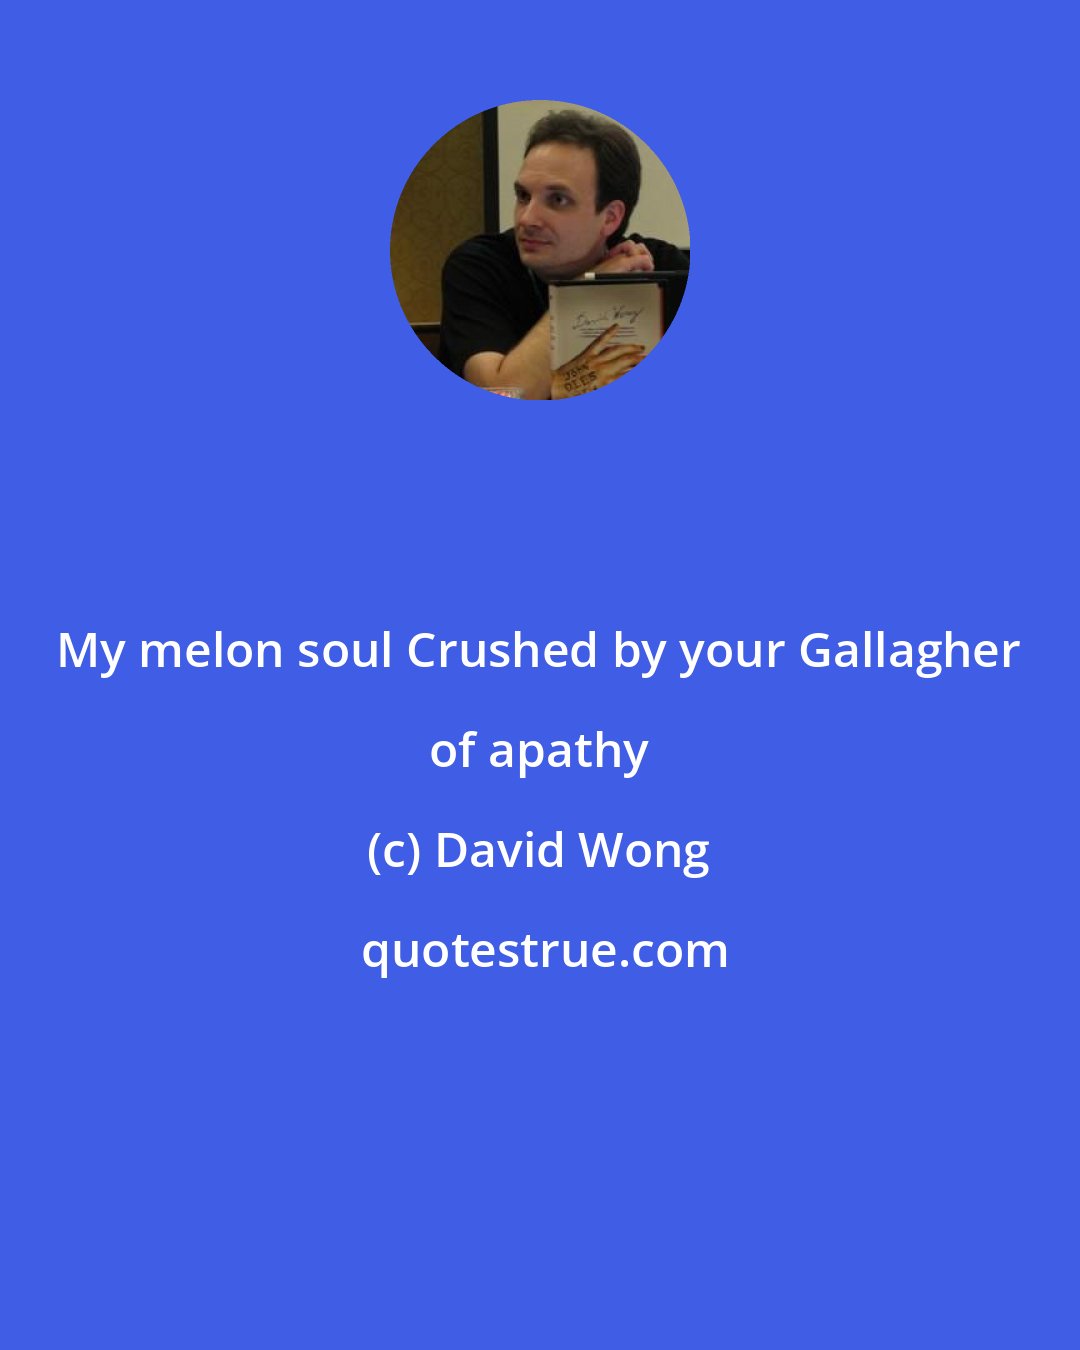 David Wong: My melon soul Crushed by your Gallagher of apathy